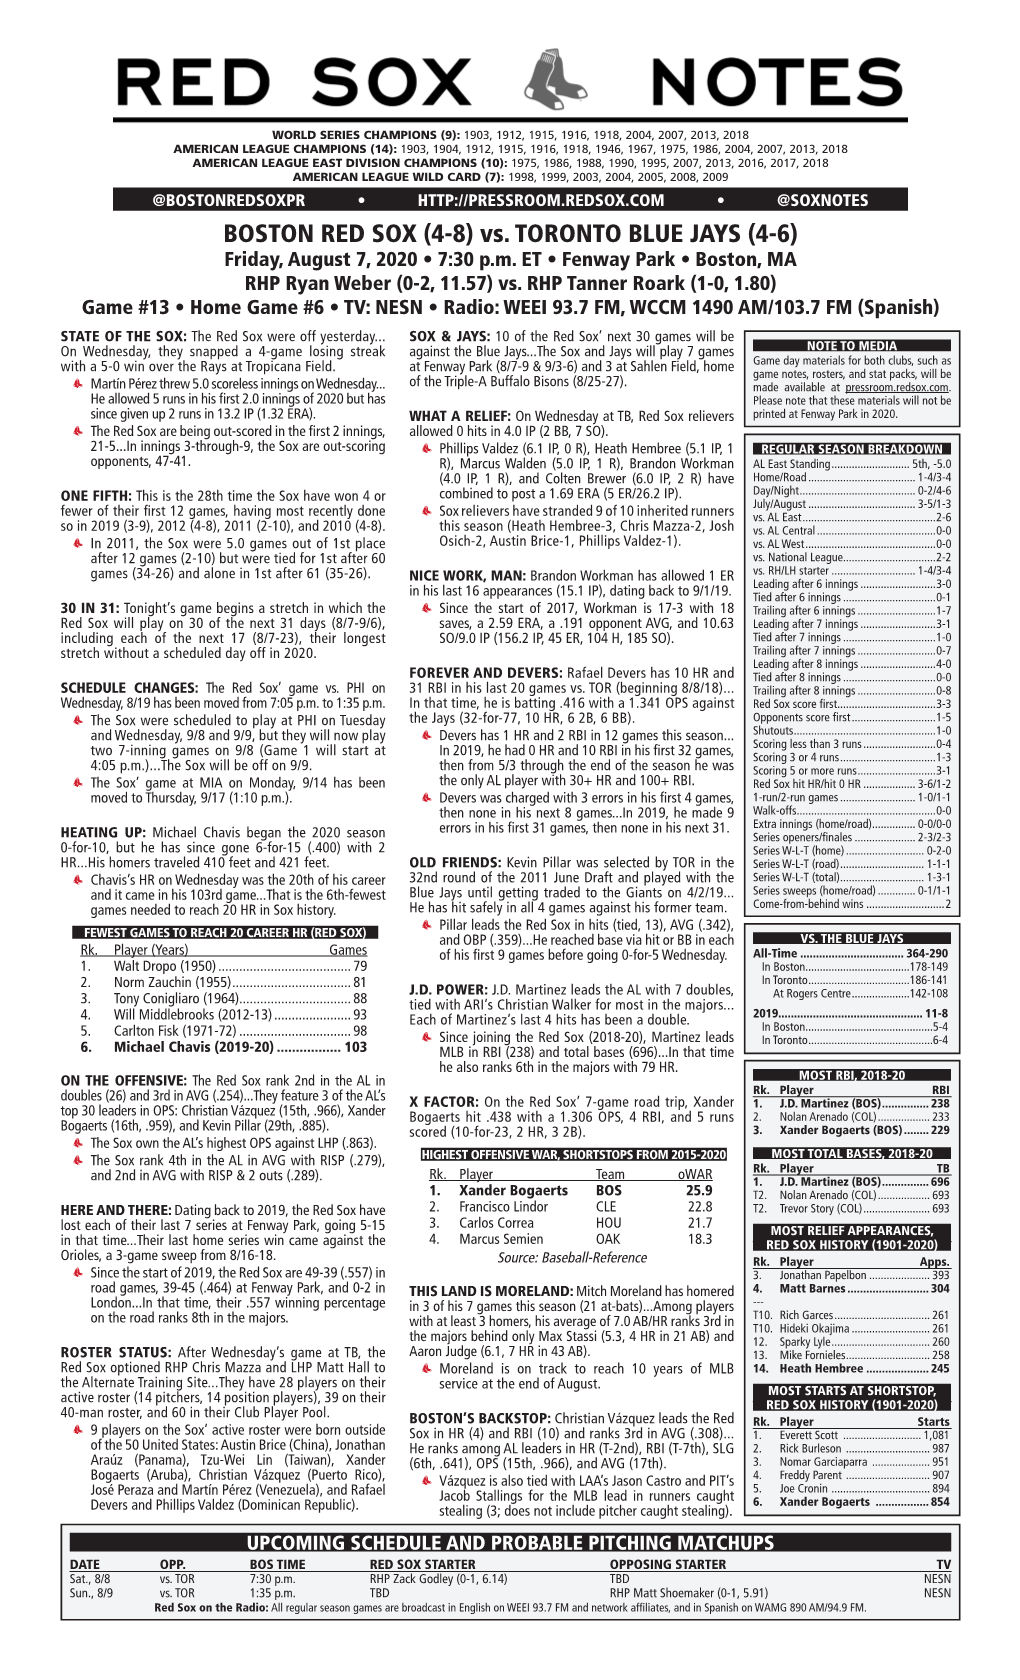 Red Sox Game Notes TONIGHT’S STARTING PITCHER Page 2